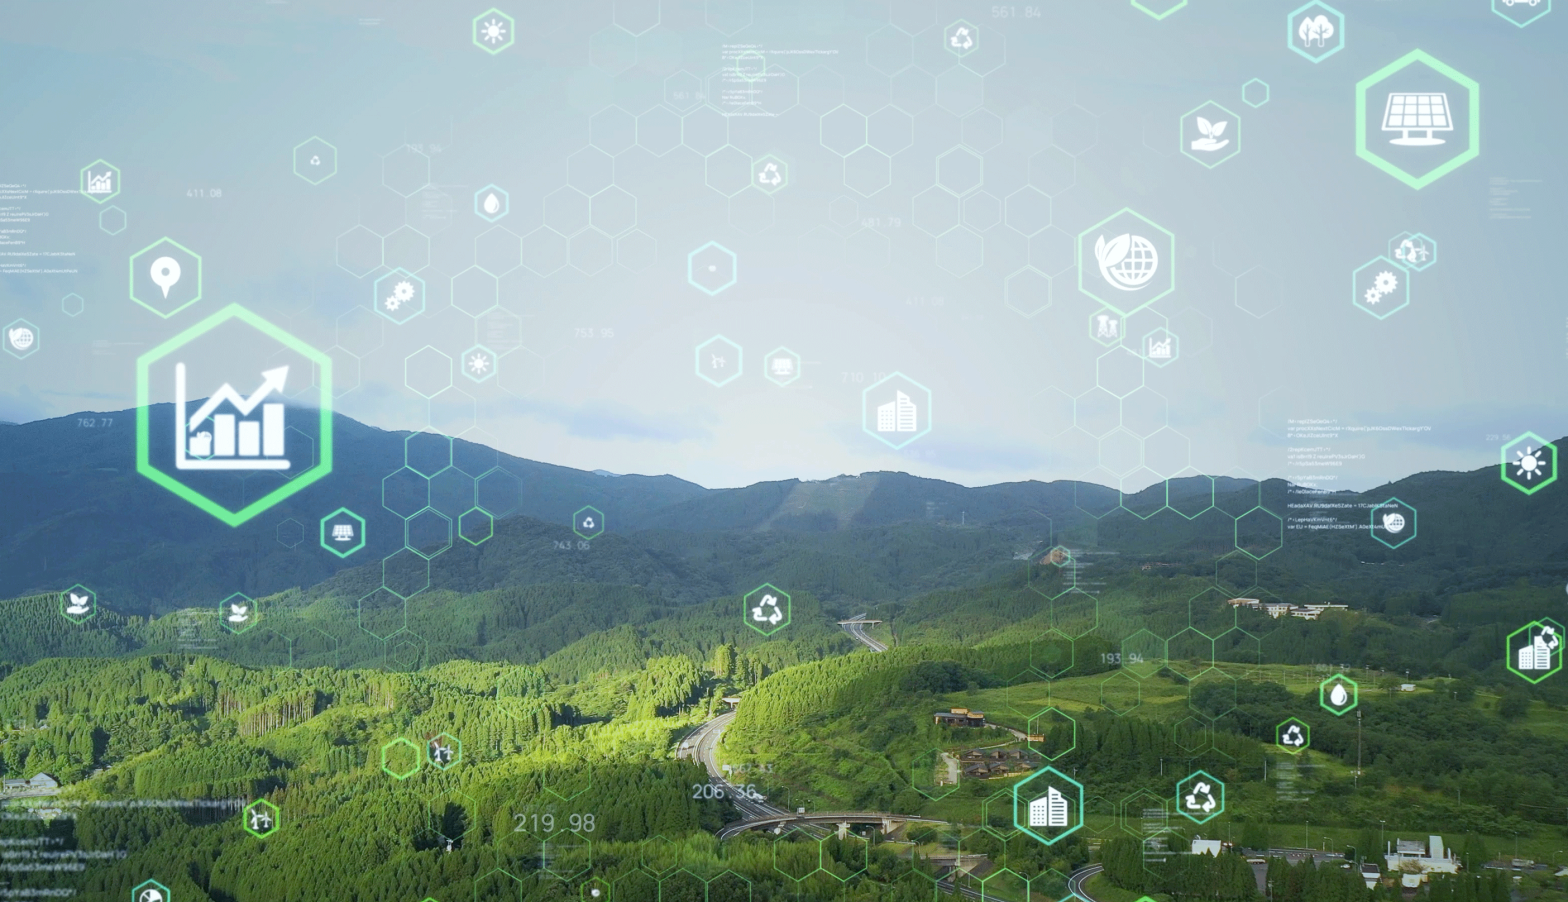 Green countryside with hills in the background. Overlayed are digital icons to represent digital transformation.